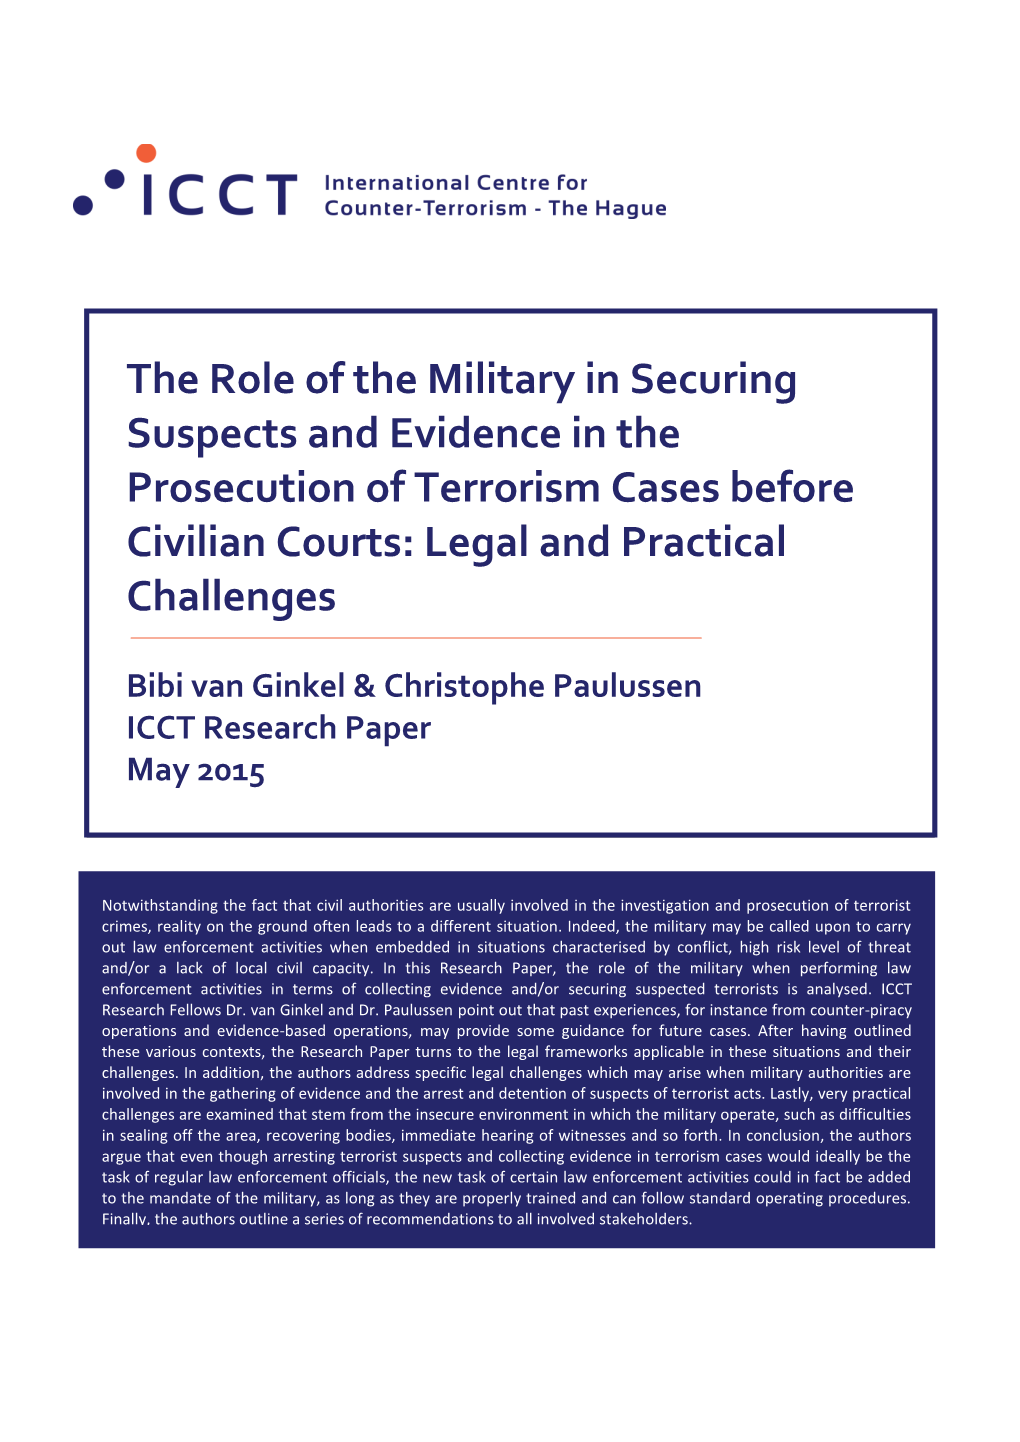 The Role of the Military in Securing Suspects and Evidence in the Prosecution of Terrorism Cases Before Civilian Courts: Legal and Practical Challenges